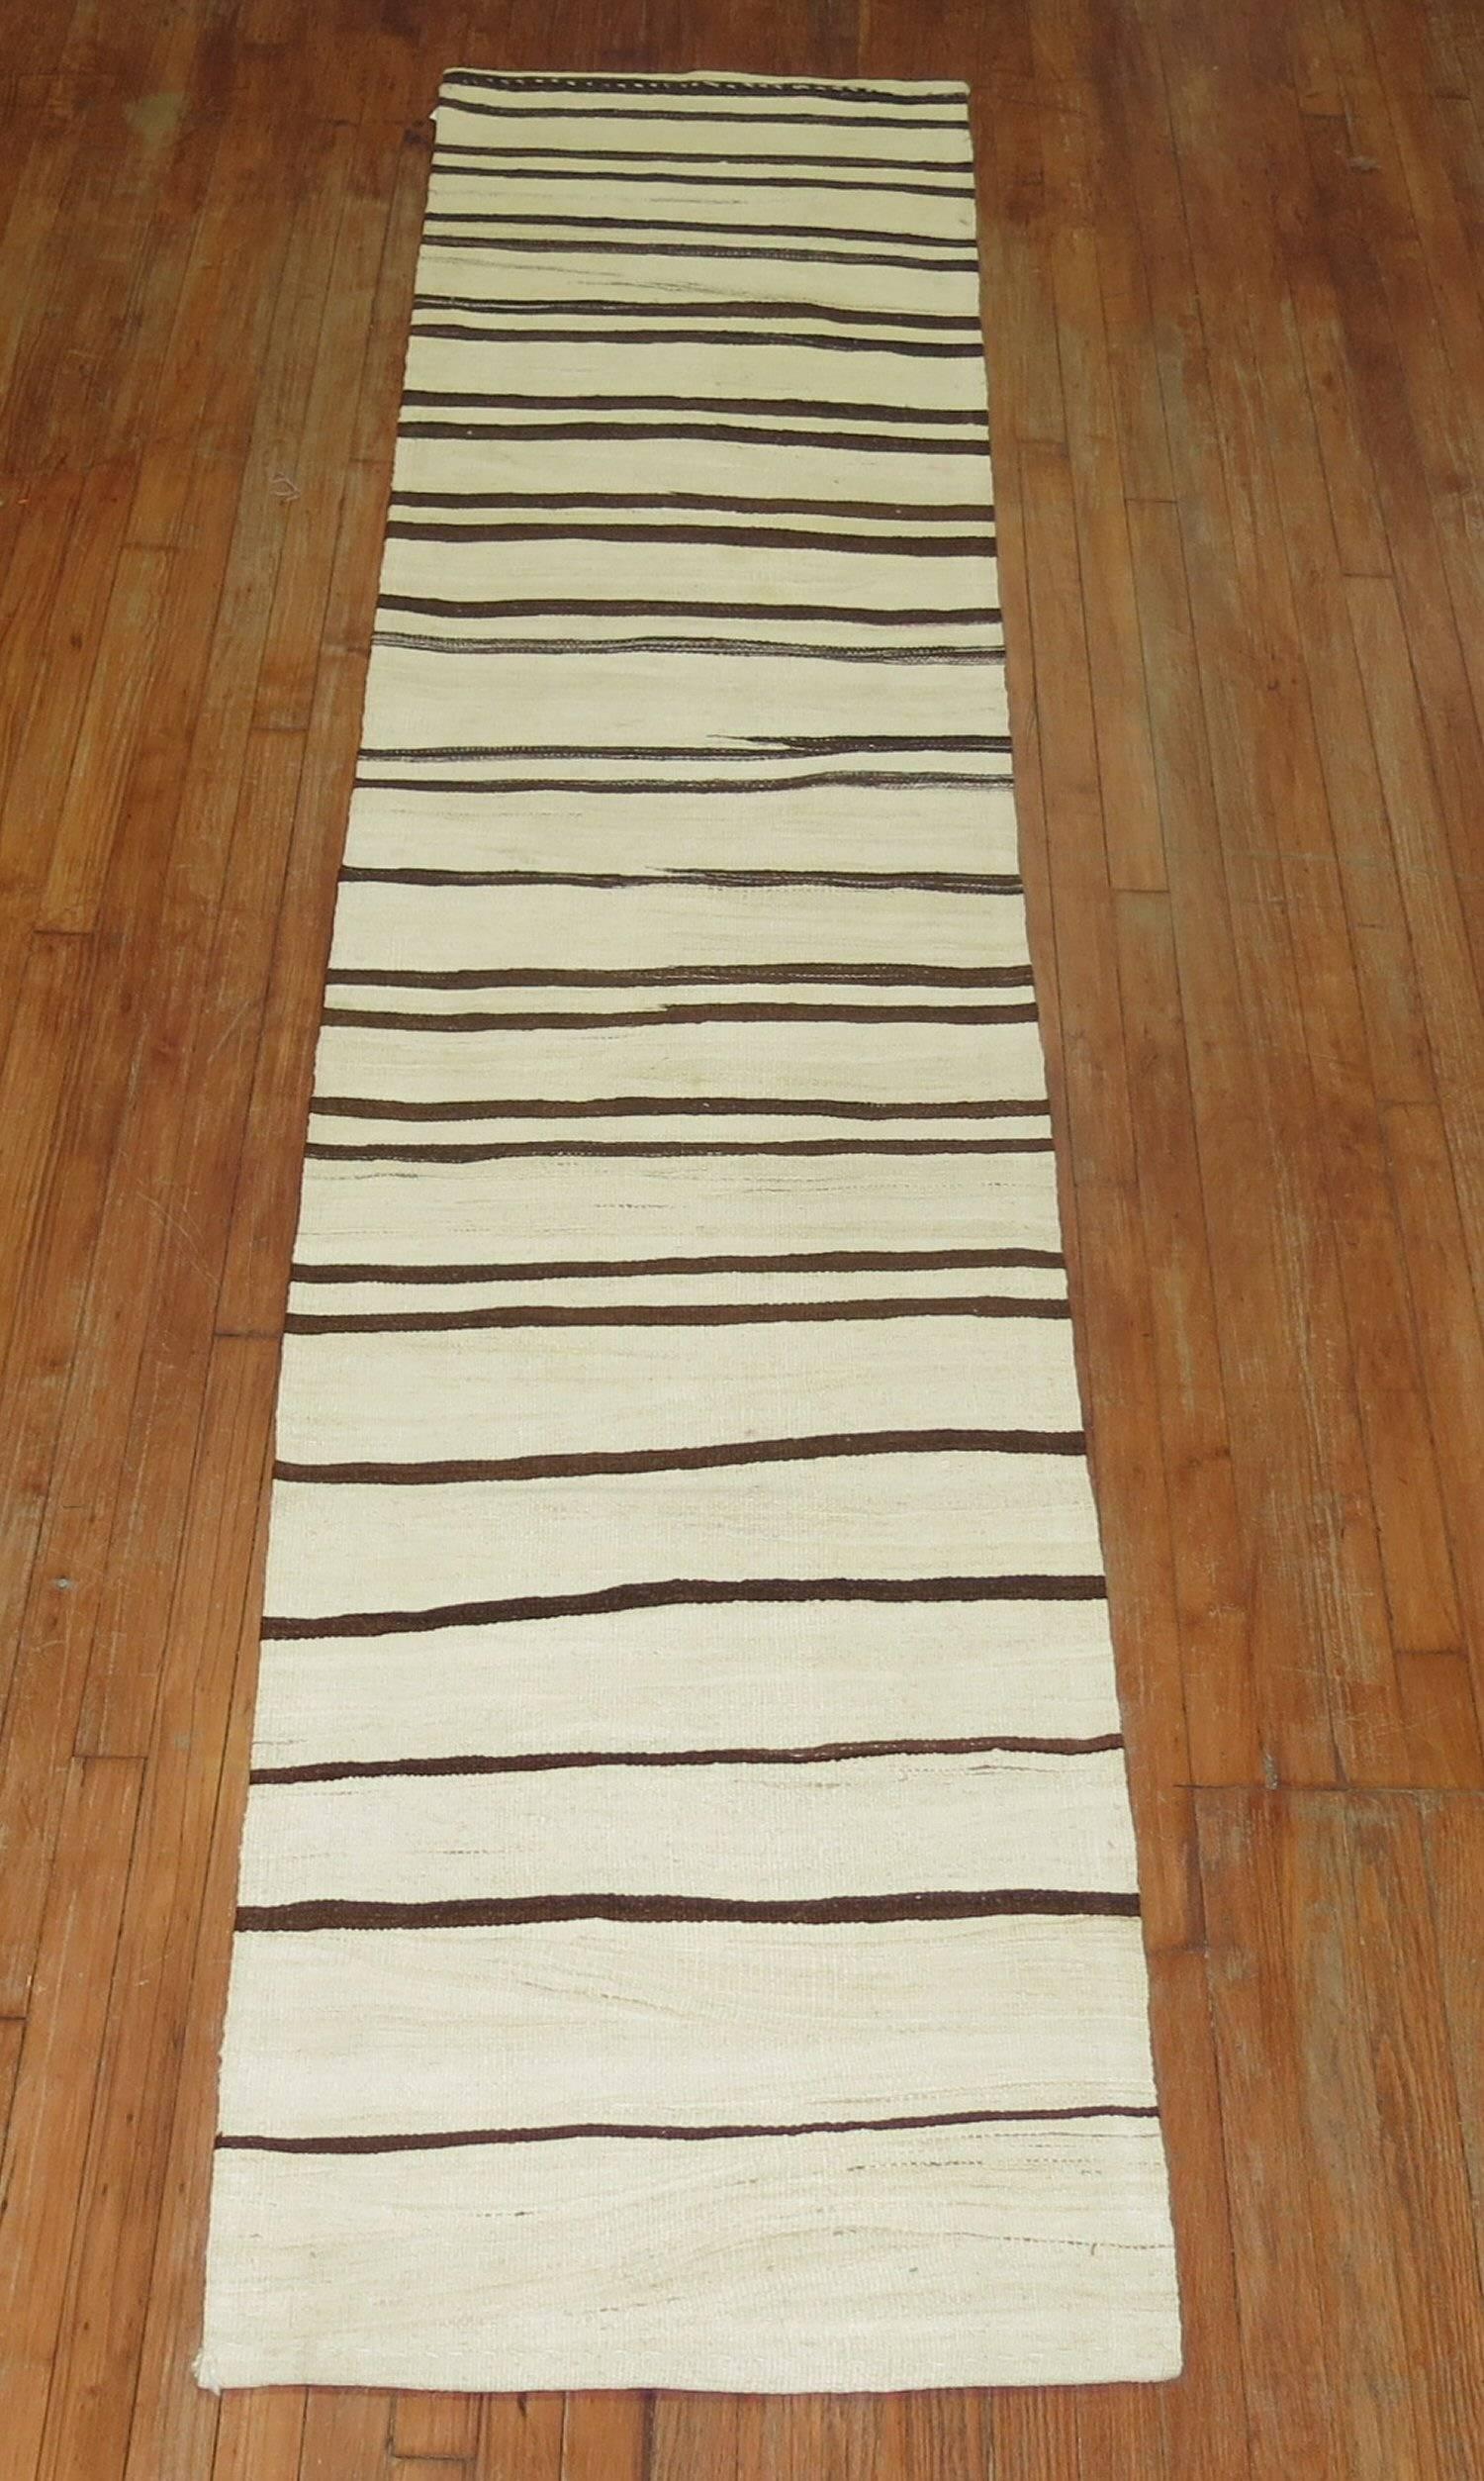 Narrow Kilim Runner from the middle of the 20th century in white and brown.